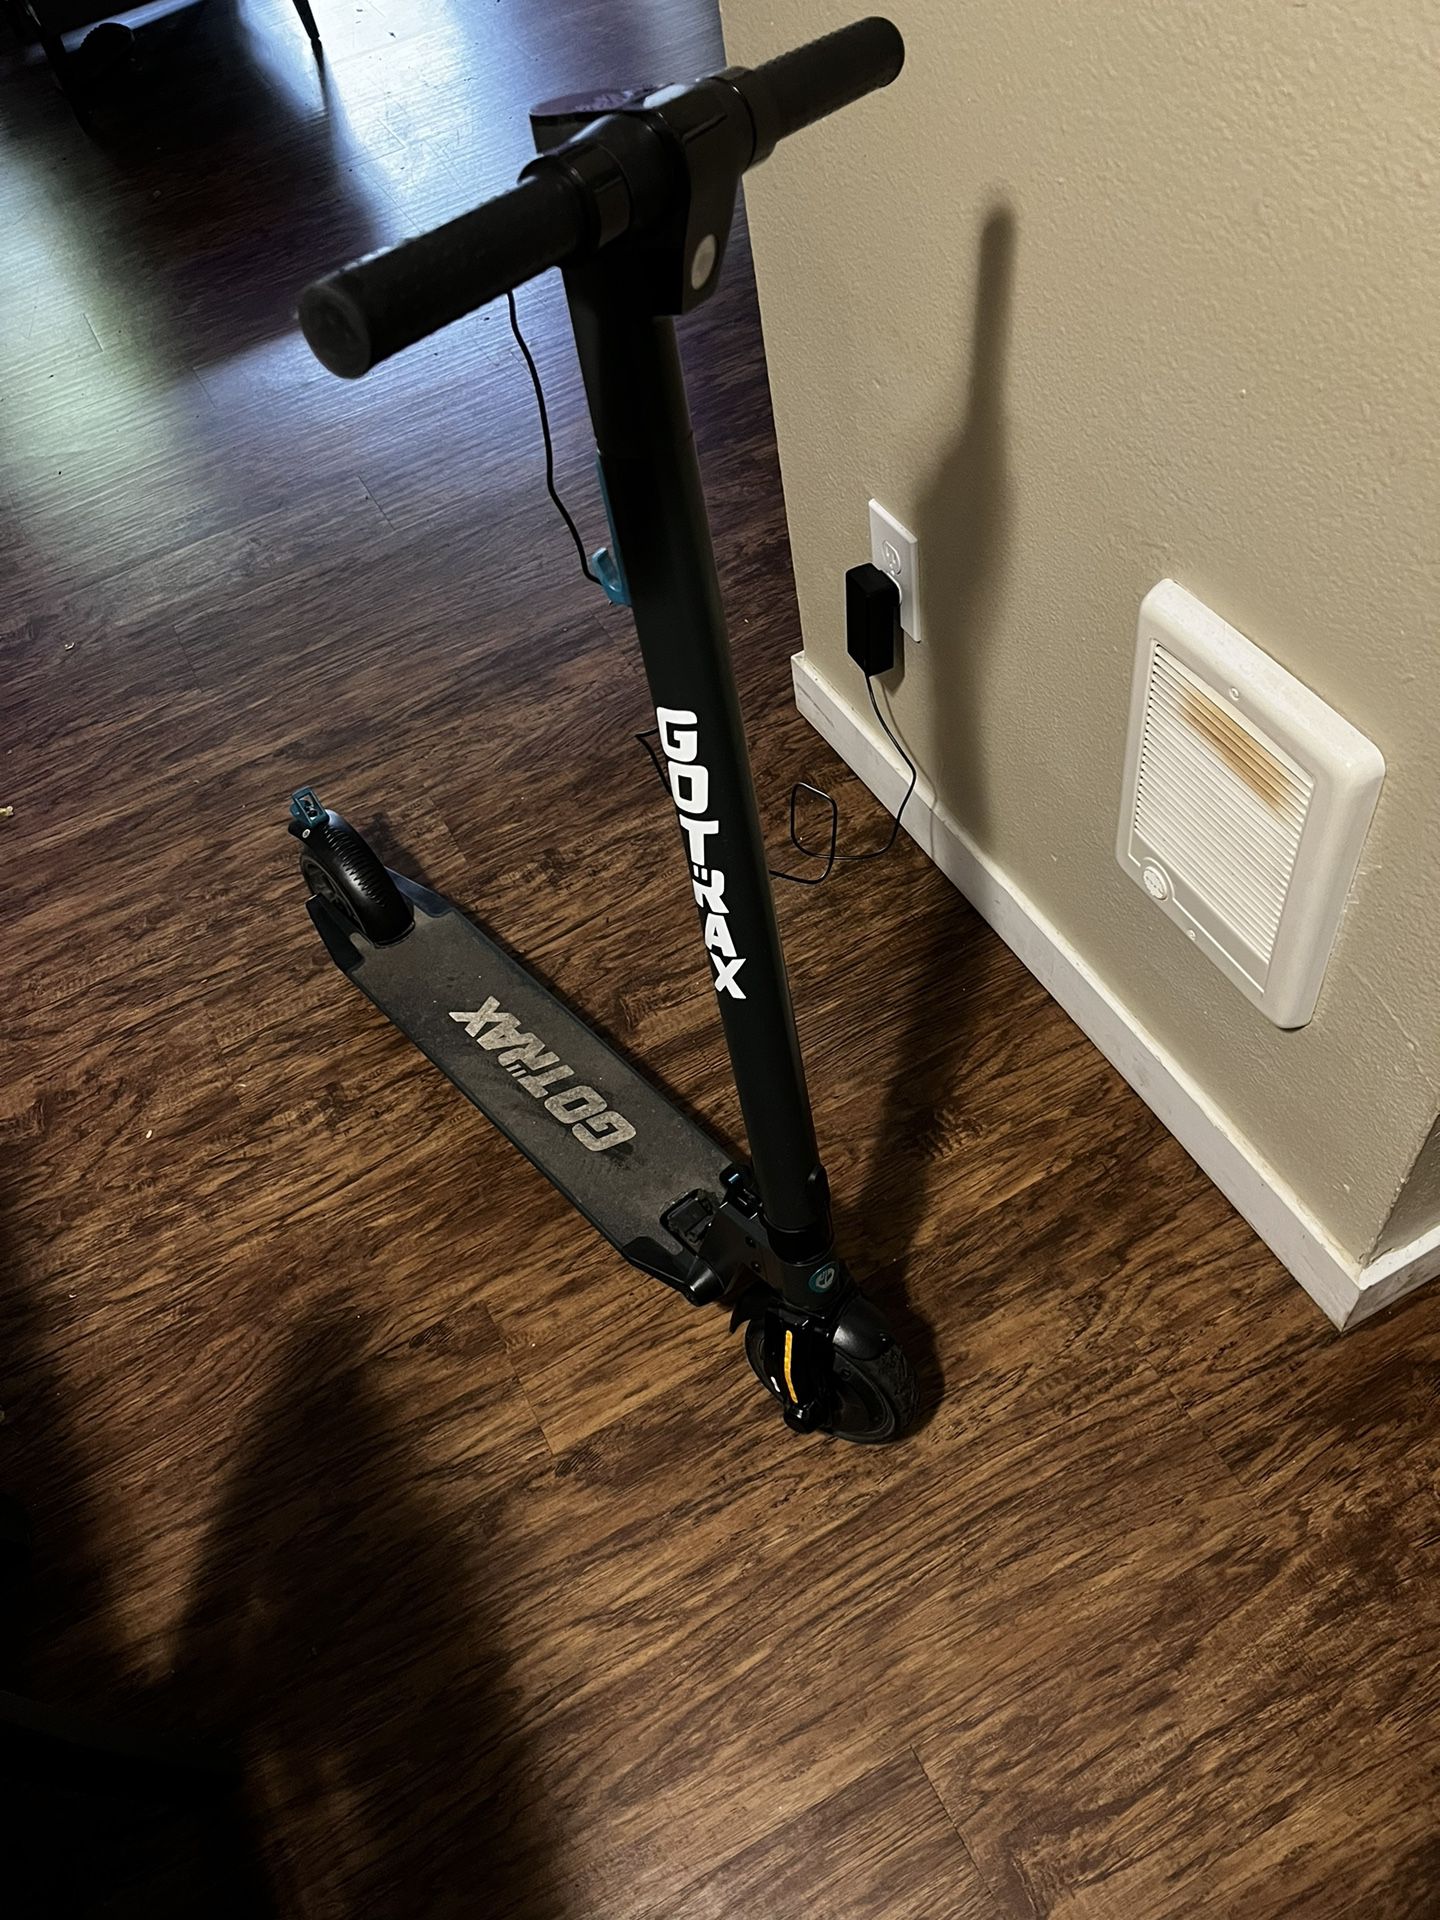 Gotrax Electric Scooter